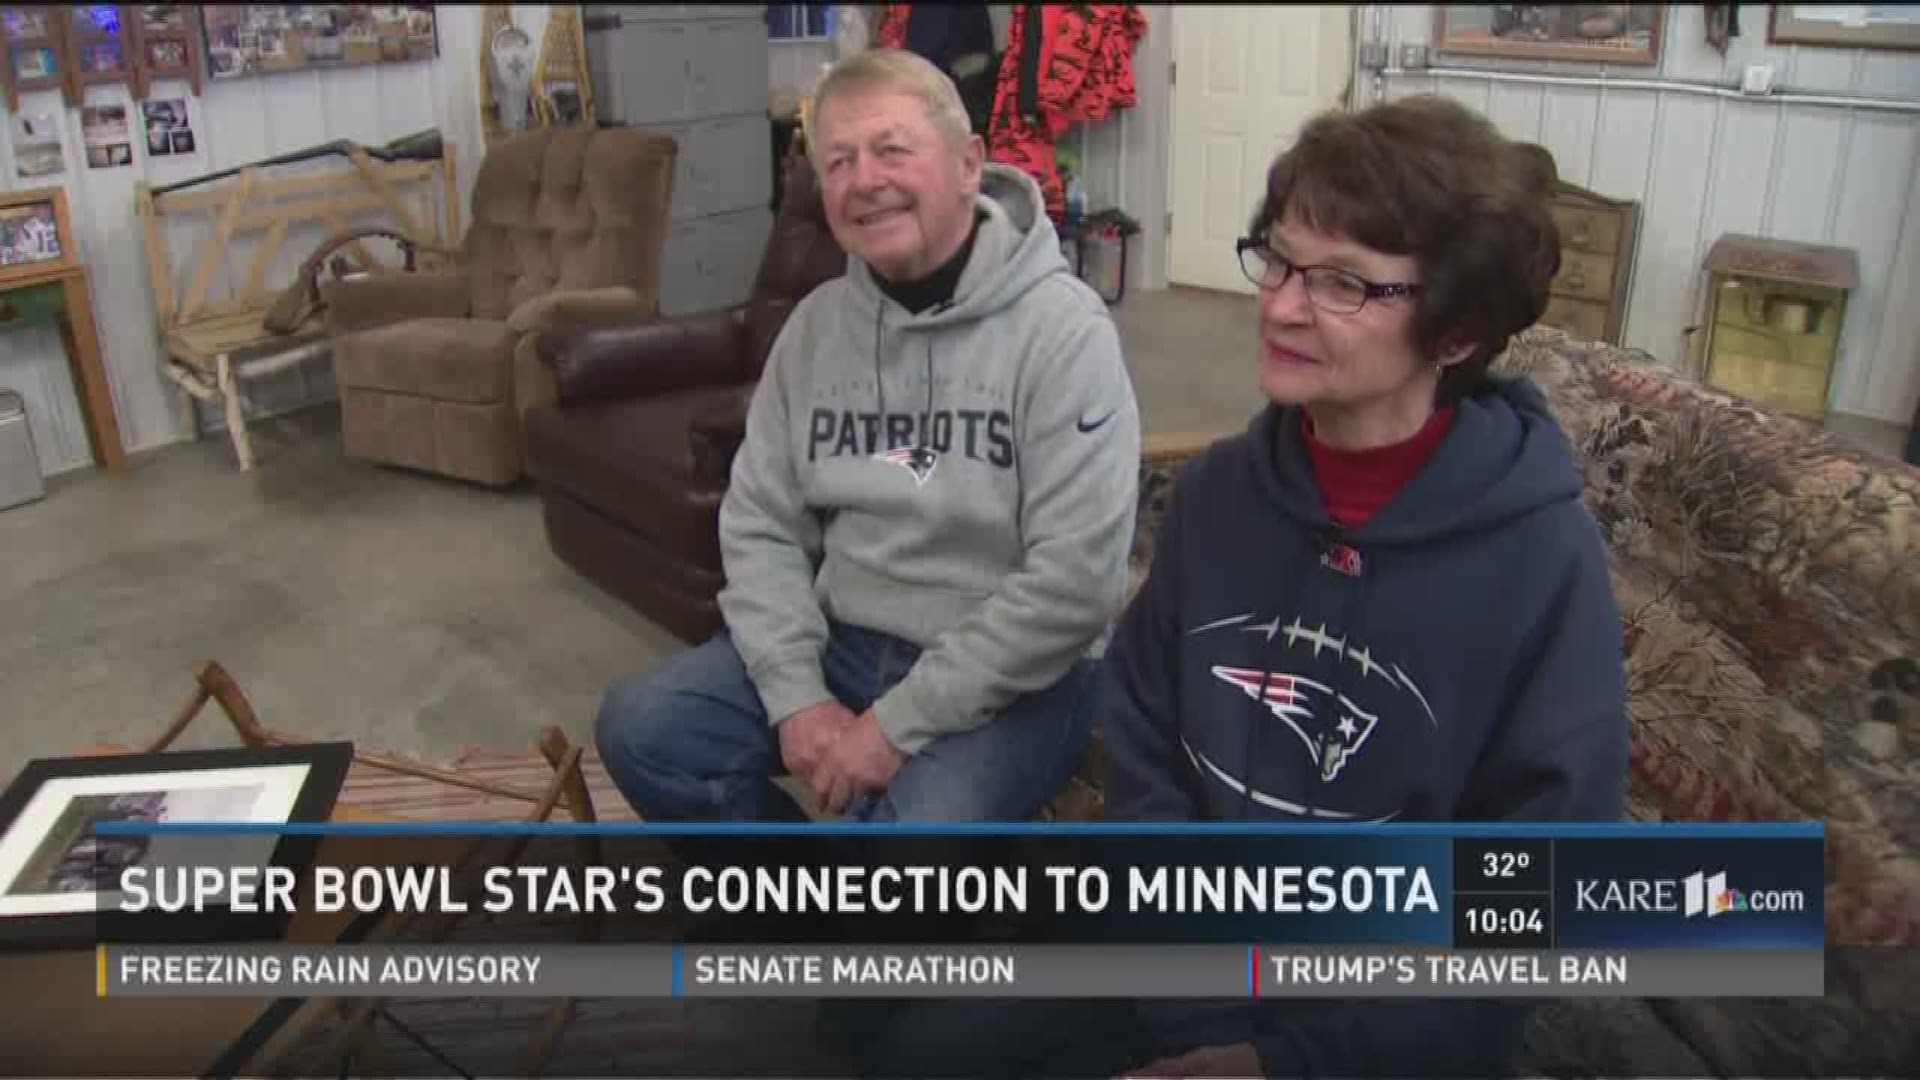 Super Bowl star's connection to Minnesota